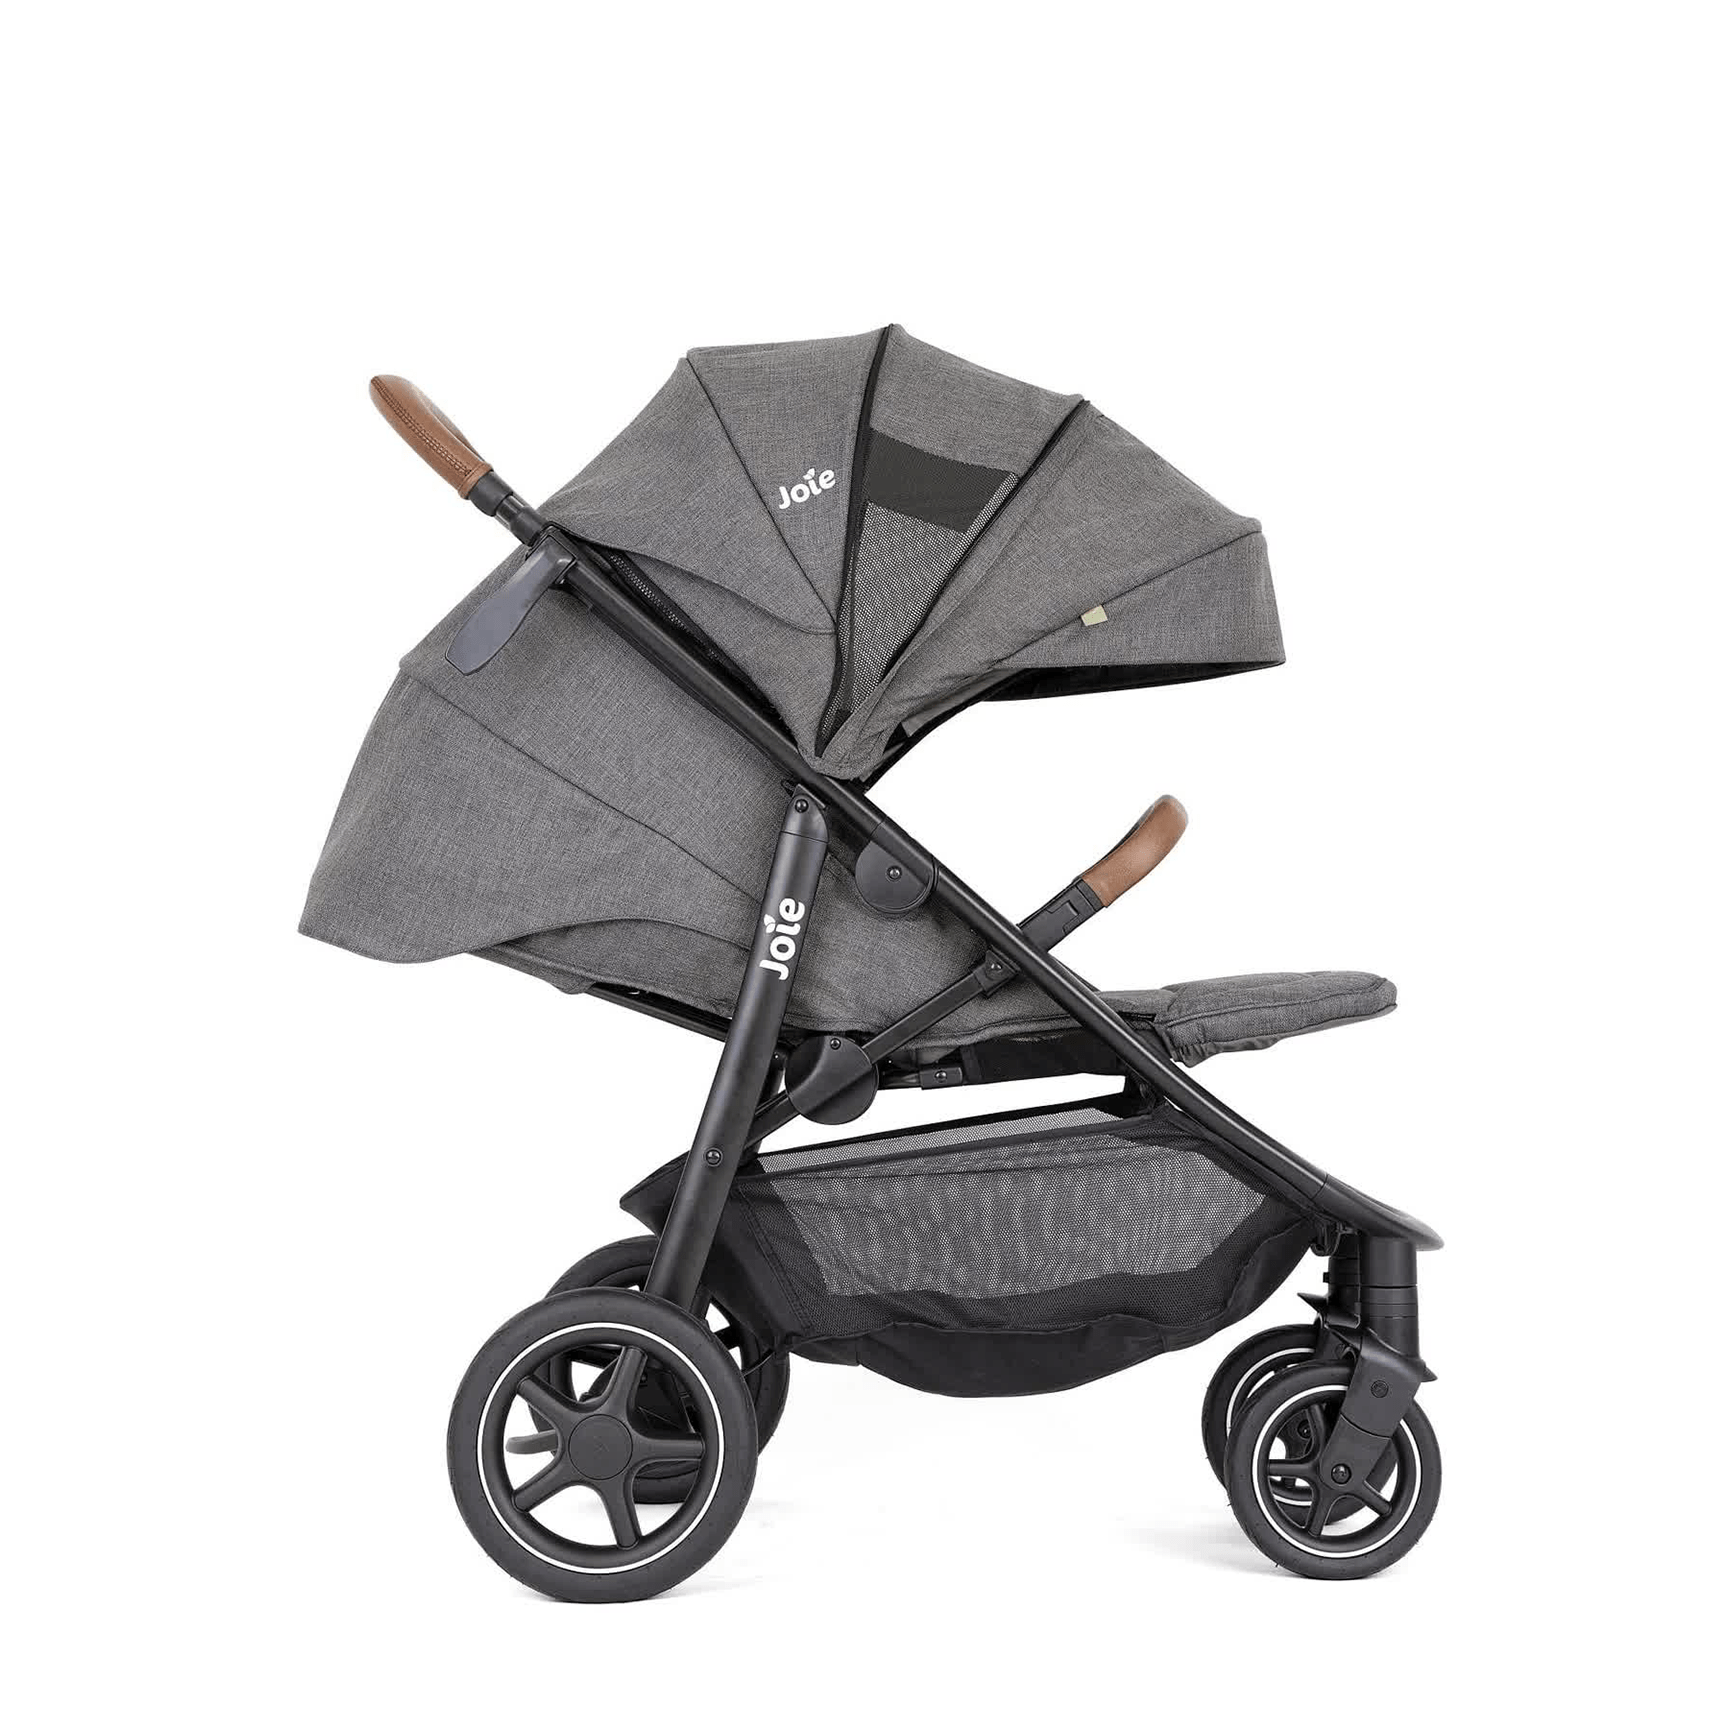 Joie Pushchairs & Buggies Joie Mytrax PRO Cycle - Shell grey S2208AACYC000